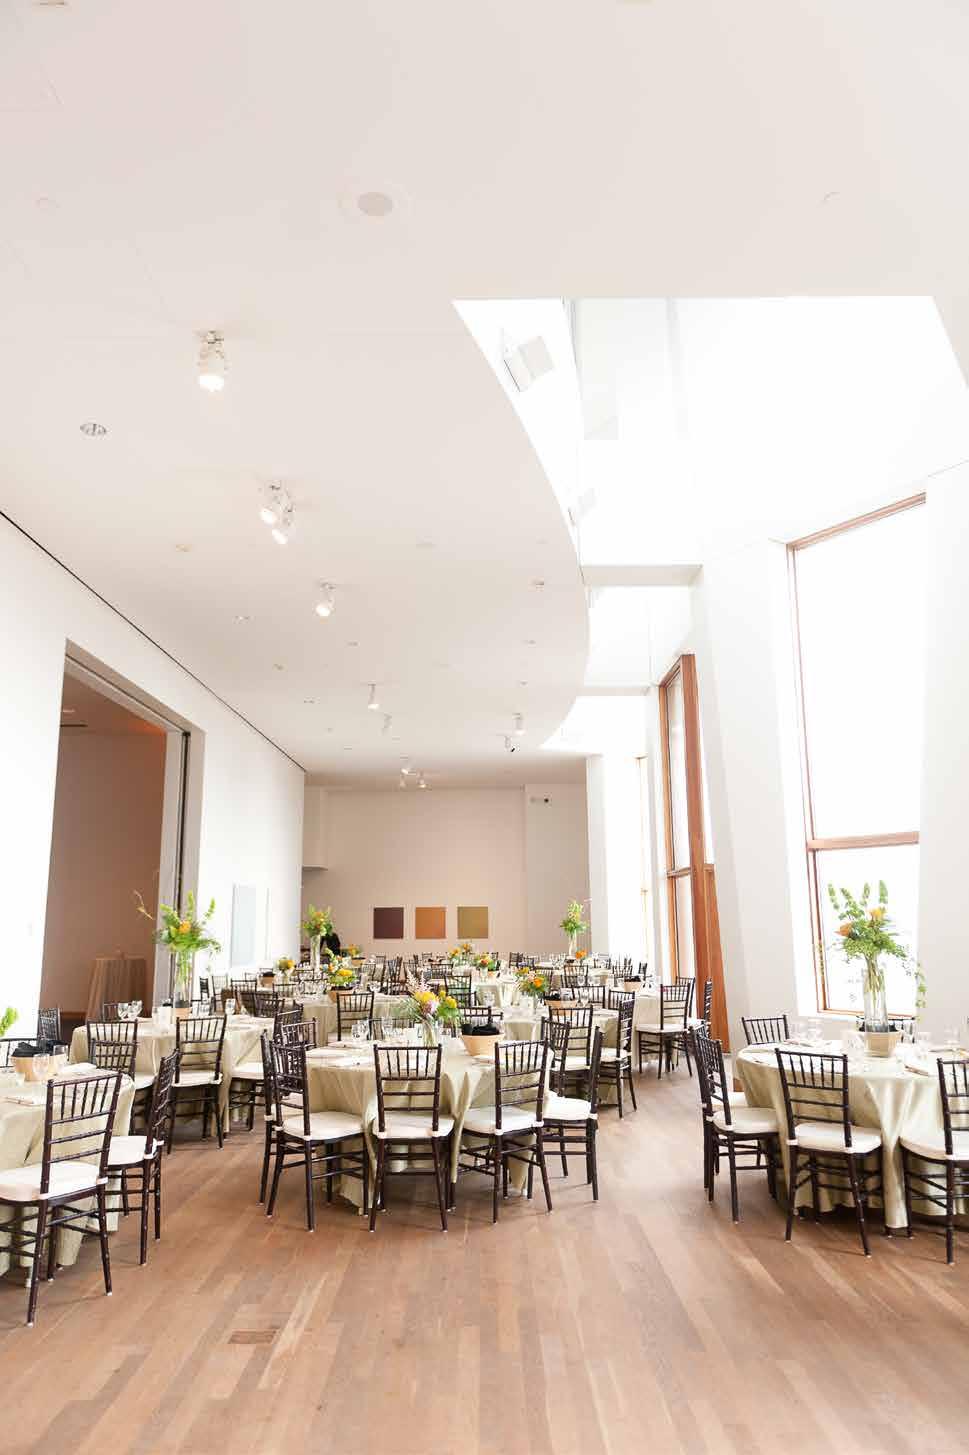 Make your next special event a night to remember by hosting it at the Weisman Art Museum. We invite you to read through our policies and procedures to ensure we are the best fit for your event needs.